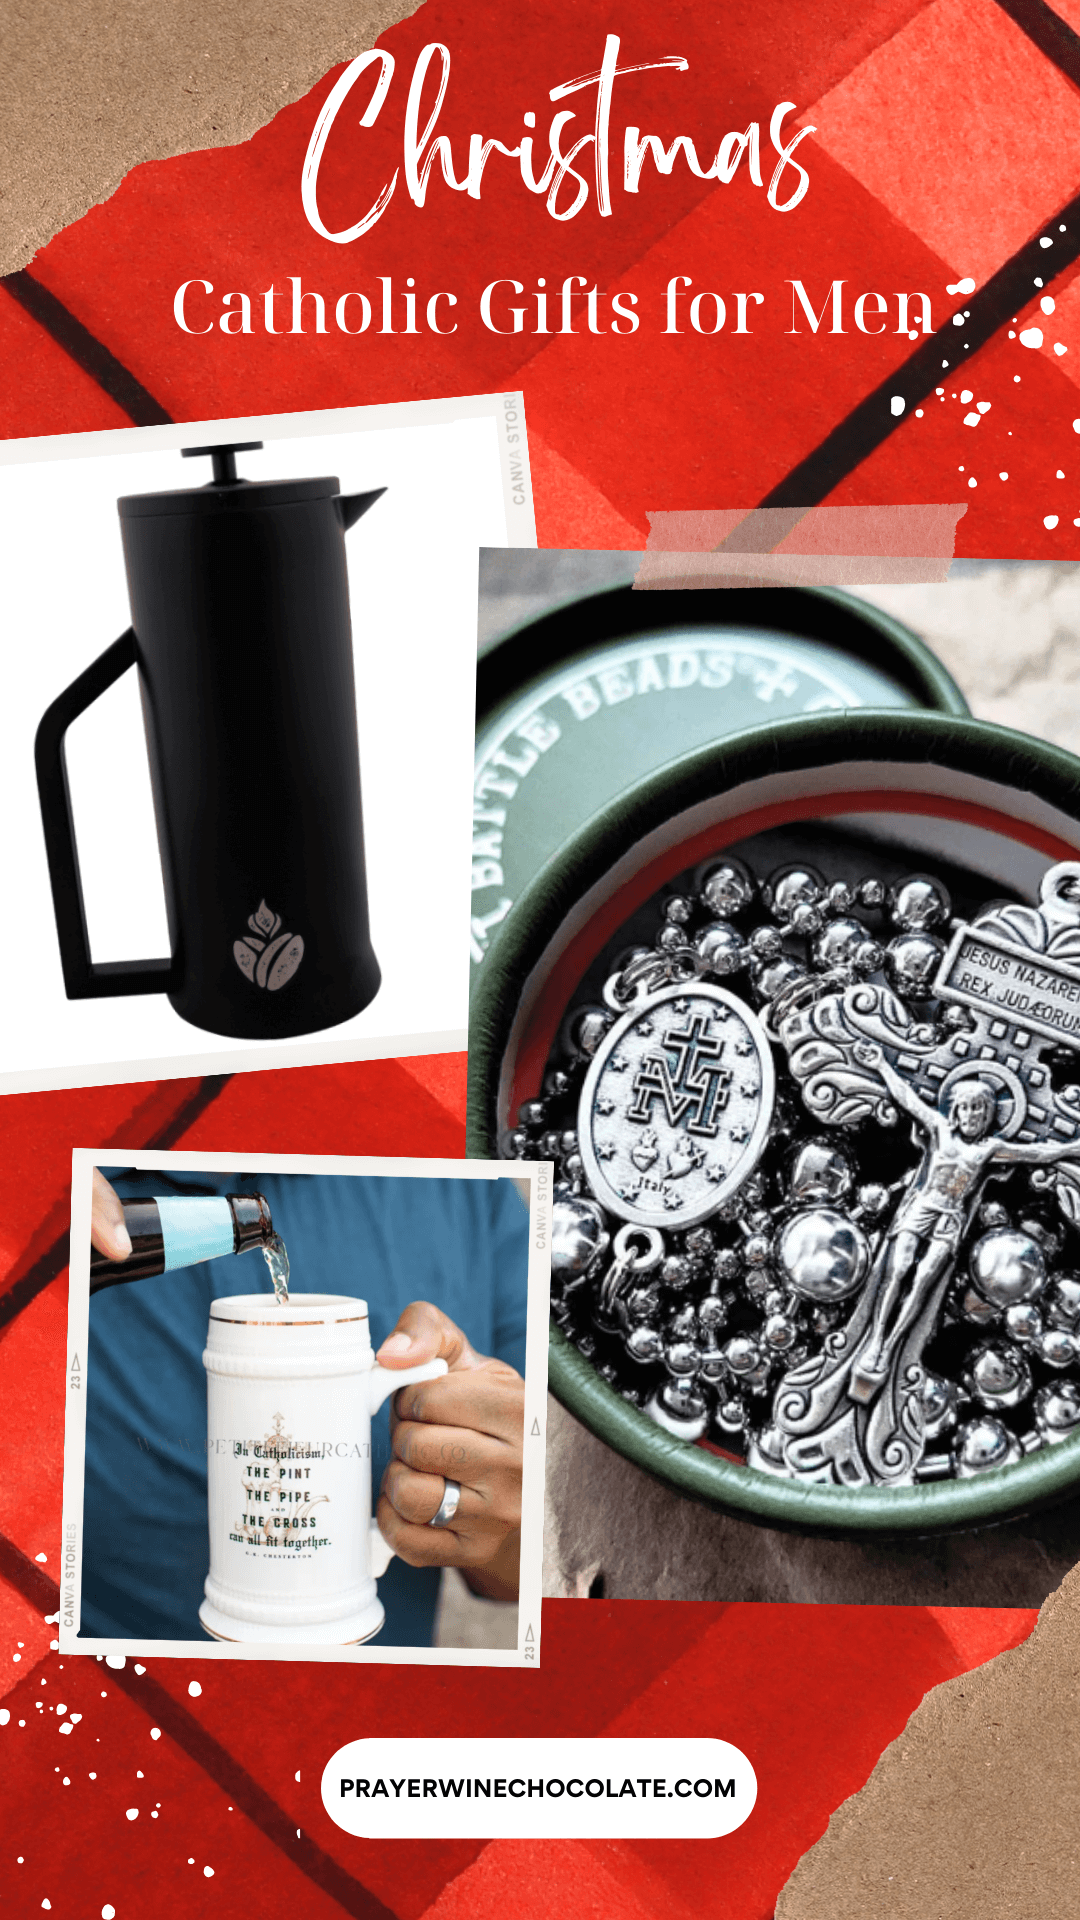 States: Christmas: Catholic Gifts for Men and has 3 of the gifts in the post pictured (a French Press, Rosary beads and a beer stein mug)